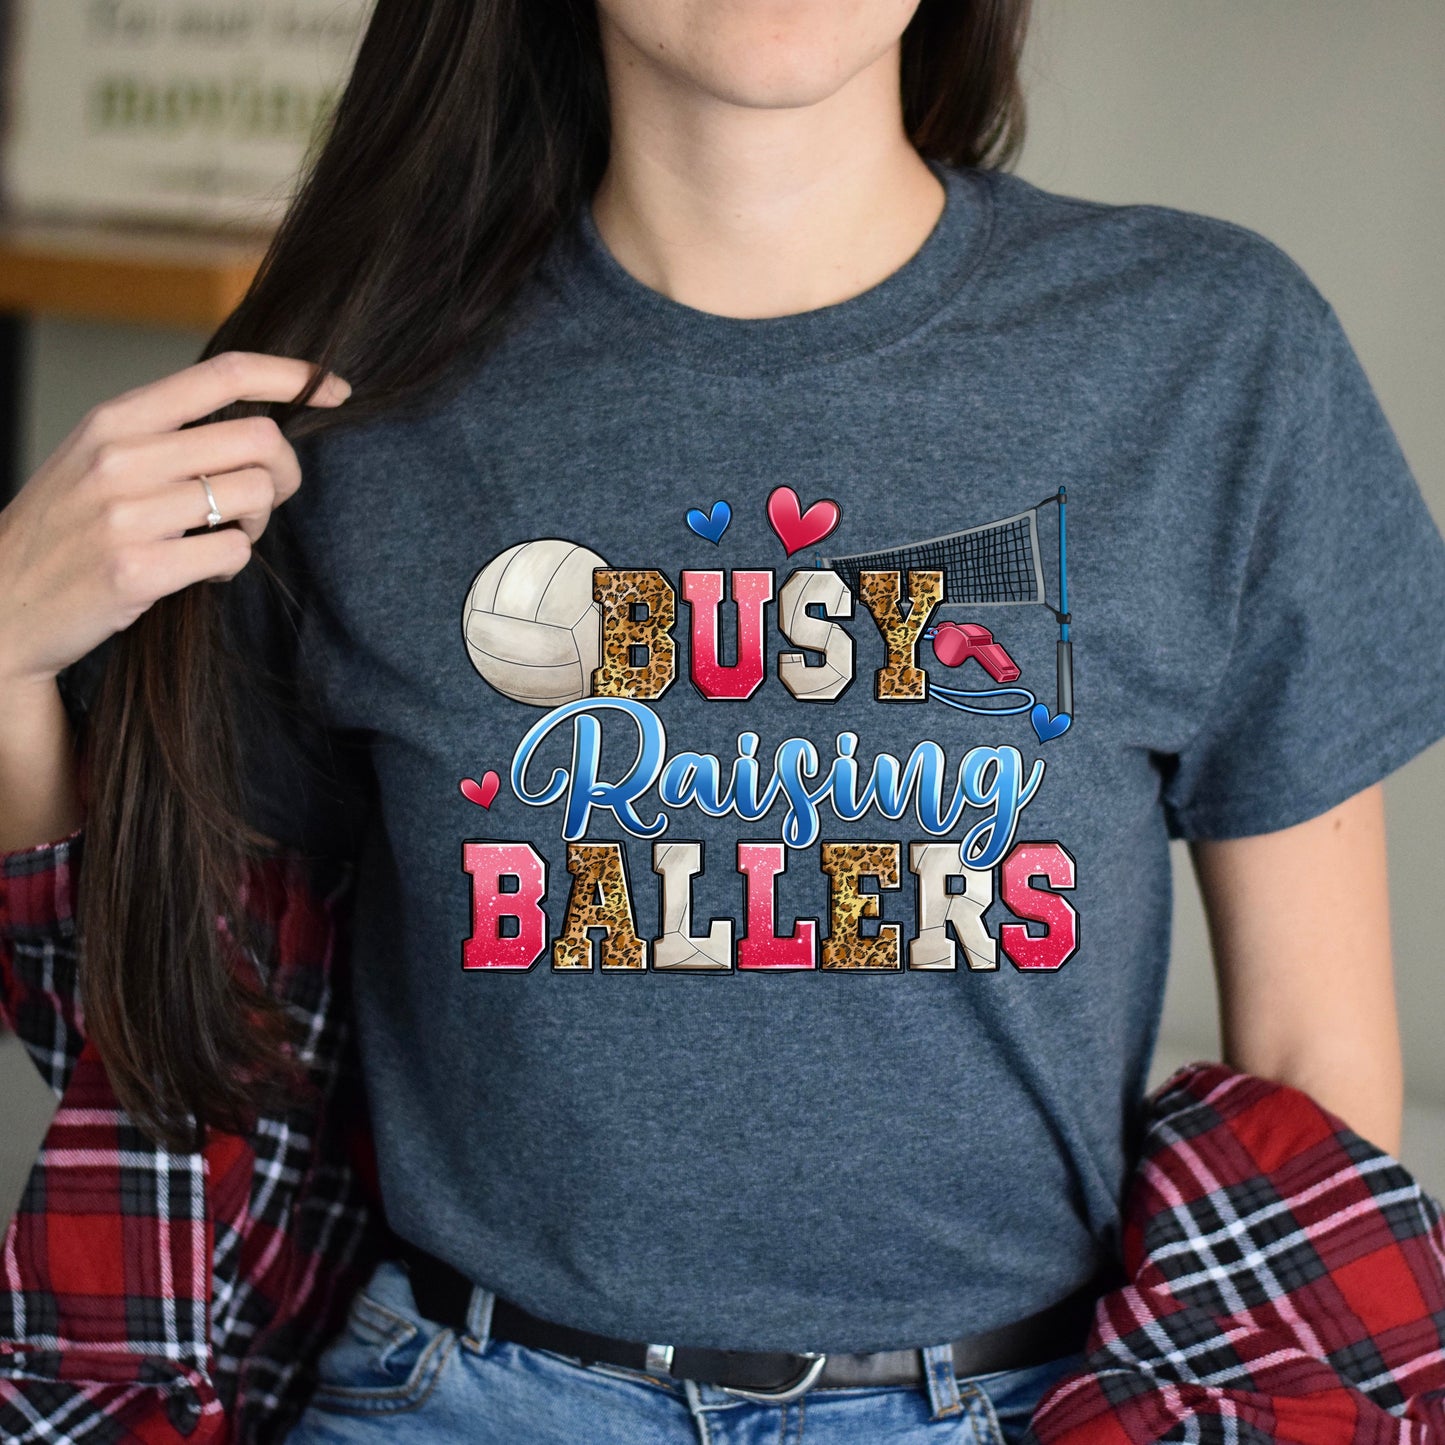 Volleyball - busy raising ballers Unisex t-shirt volleyball mom tee gift-Family-Gift-Planet